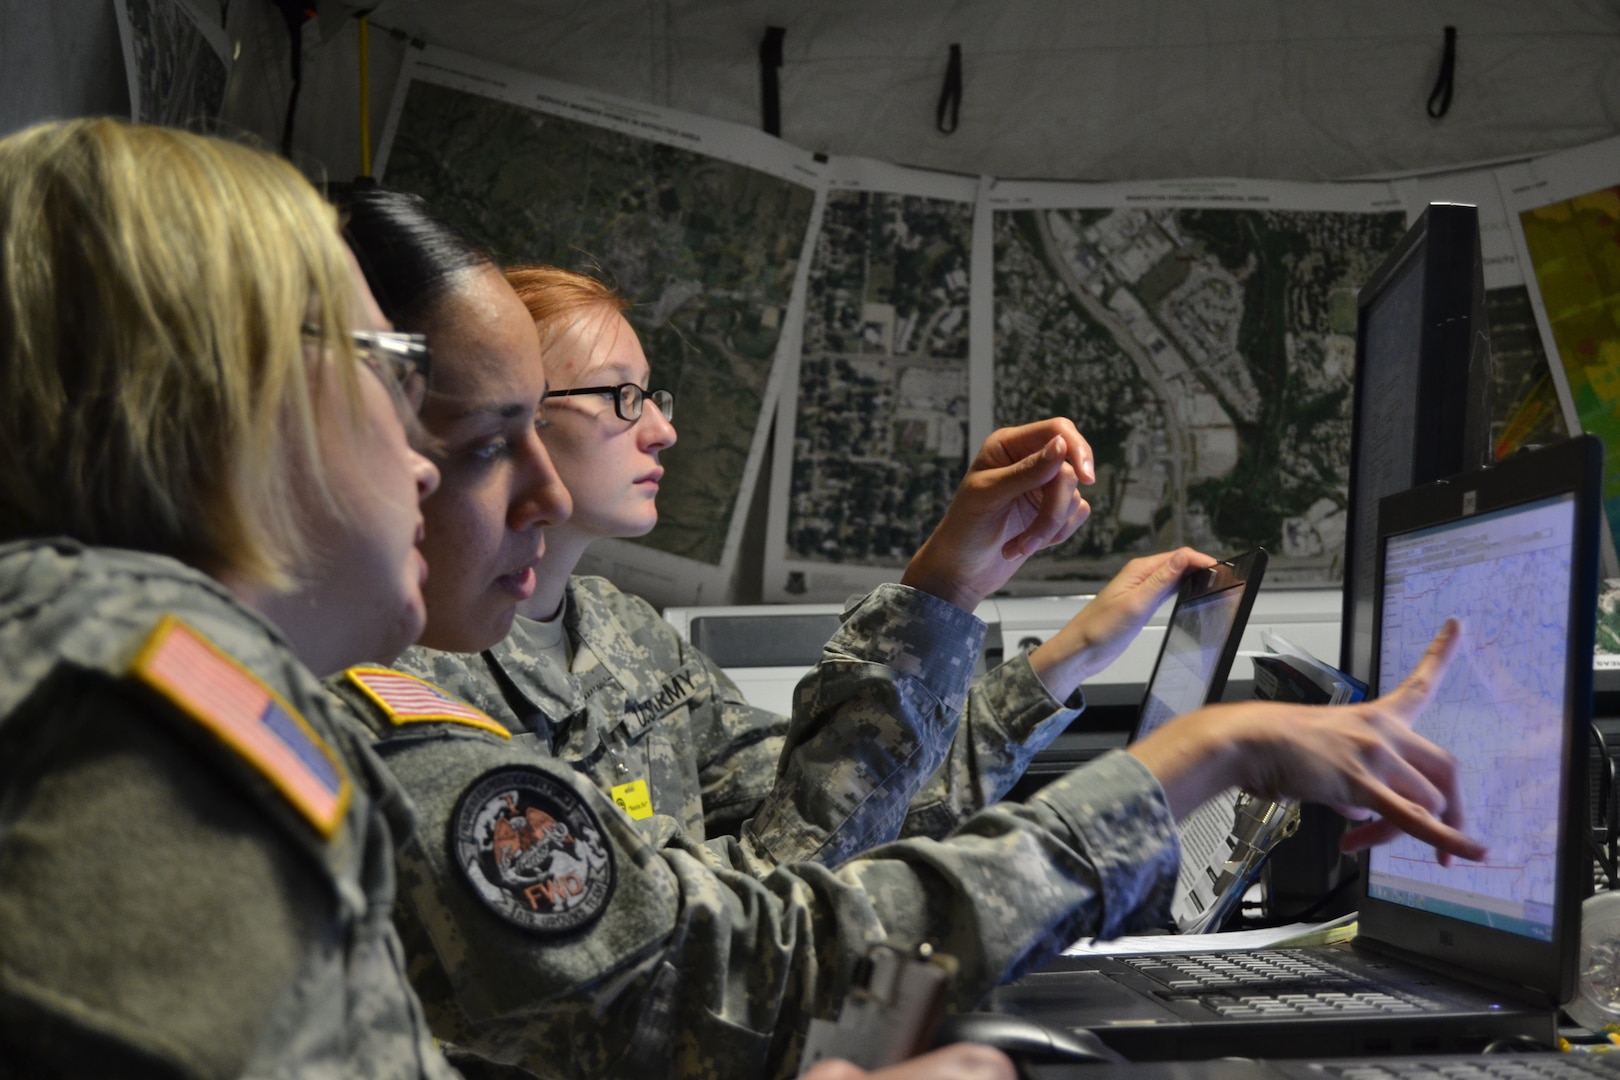 Capt. Jennifer Staton, a space operations officer, Sgt. Cassandra Quinones and Pfc. Miranda Yost, geospatial engineers, use mapping software during the multi-state large-scale, natural disaster emergency response exercise Vigilant Guard 2014, hosted by the Kansas National Guard in Salina, Kan., Aug. 4-7. The Soldiers are a part of Army Space Support Team 30, 117th Space Support Battalion with the Colorado National Guard. (Photo by Capt. Benjamin Gruver, 105th Mobile Public Affairs Detachment)